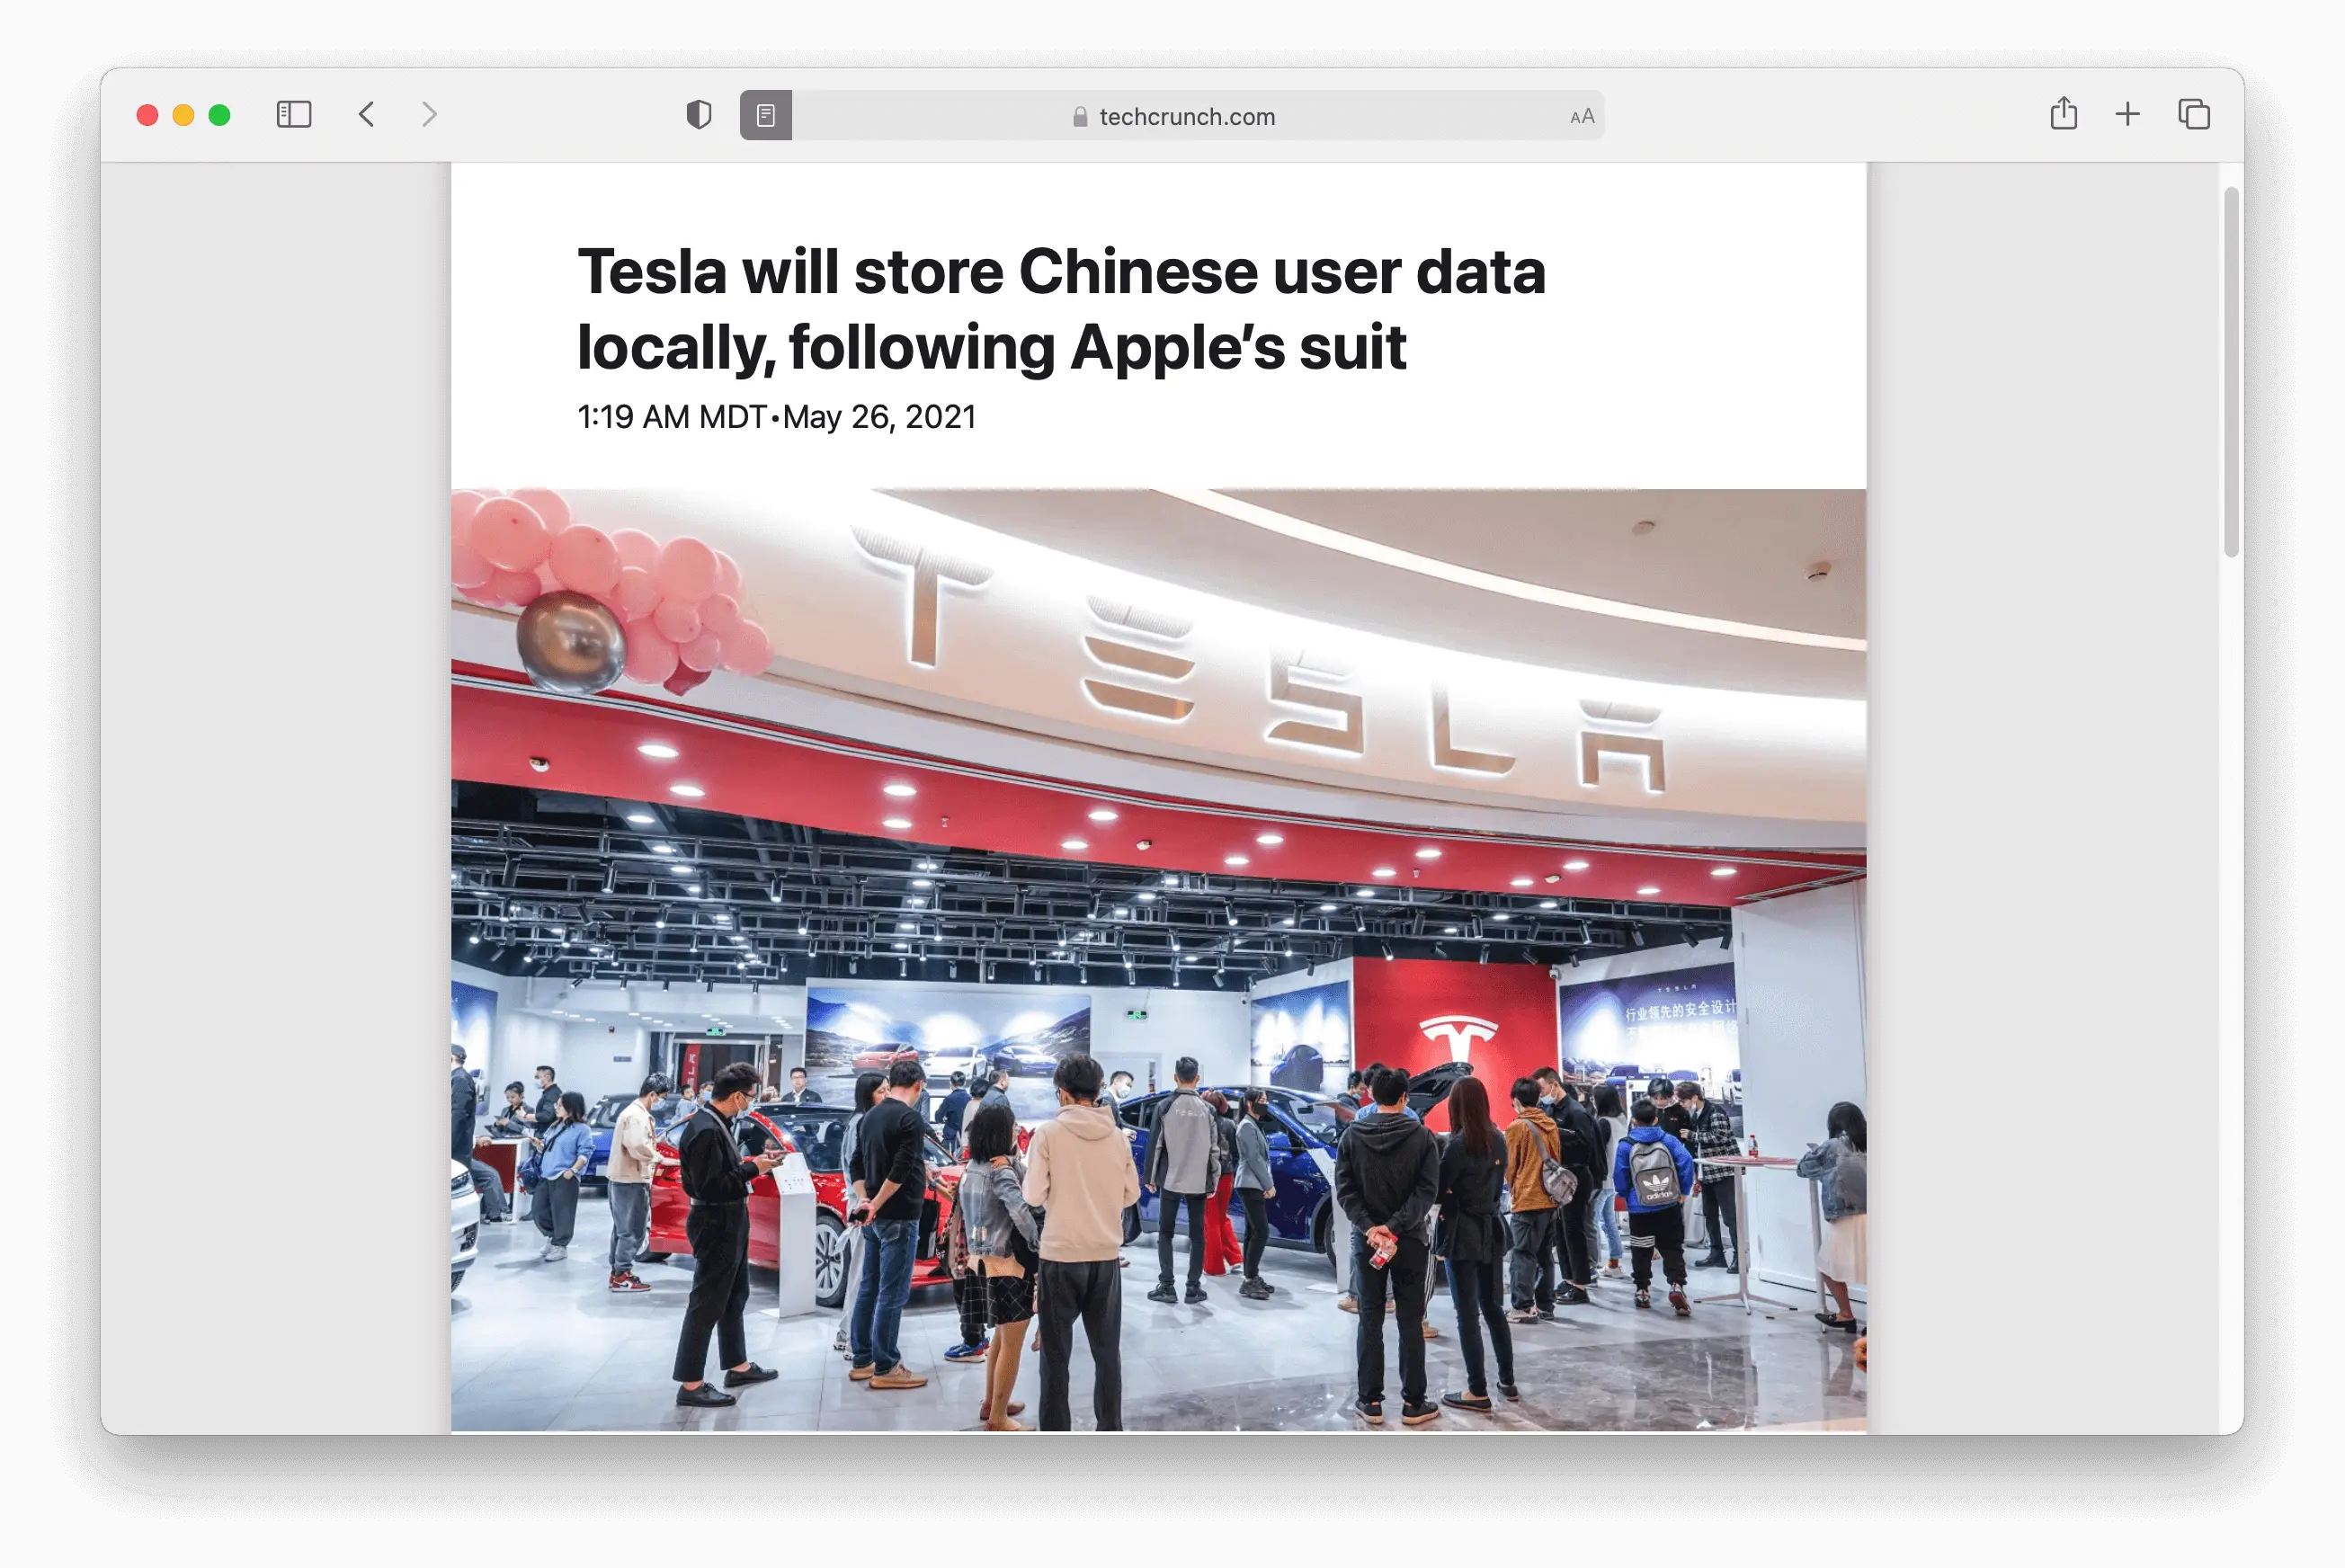 News Article on Tesla Data Storage in China